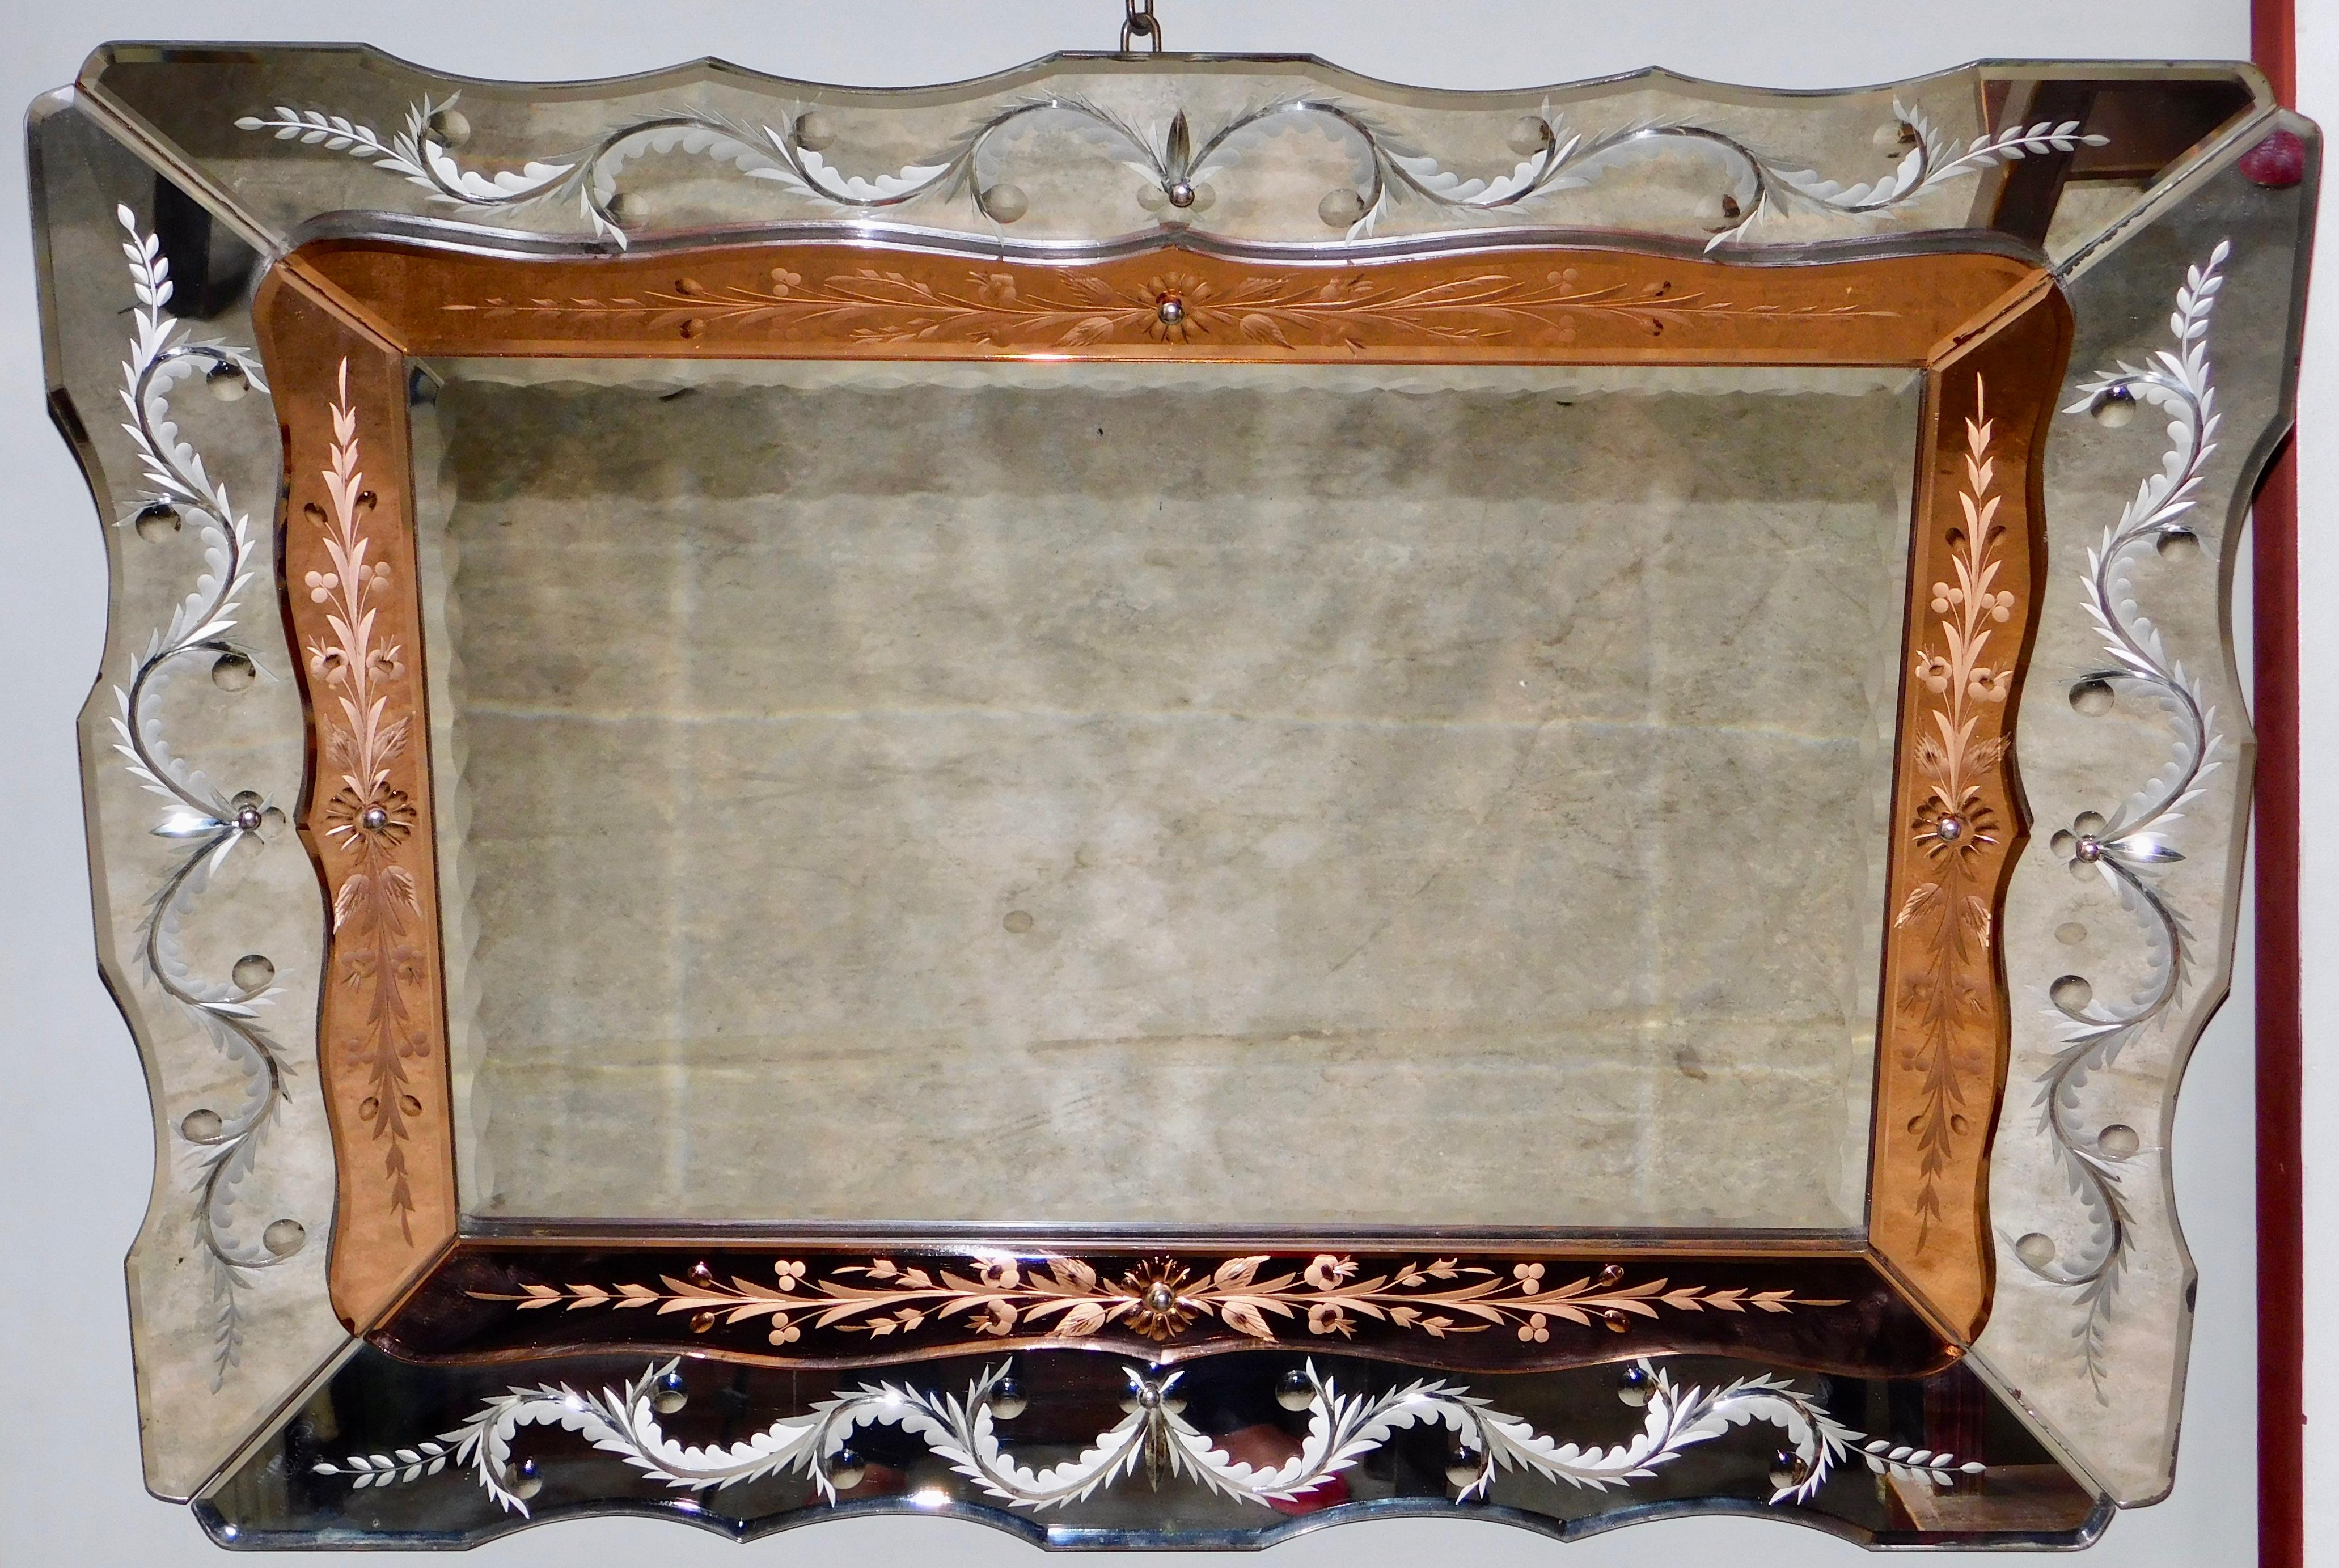 Elegant Venetian, circa 1940 Hollywood Regency mirror with reverse plume and starburst etched panels. The inner panels are a lovely peach color with delicate reverse etched design. The whole mirror is in very good condition retaining all the